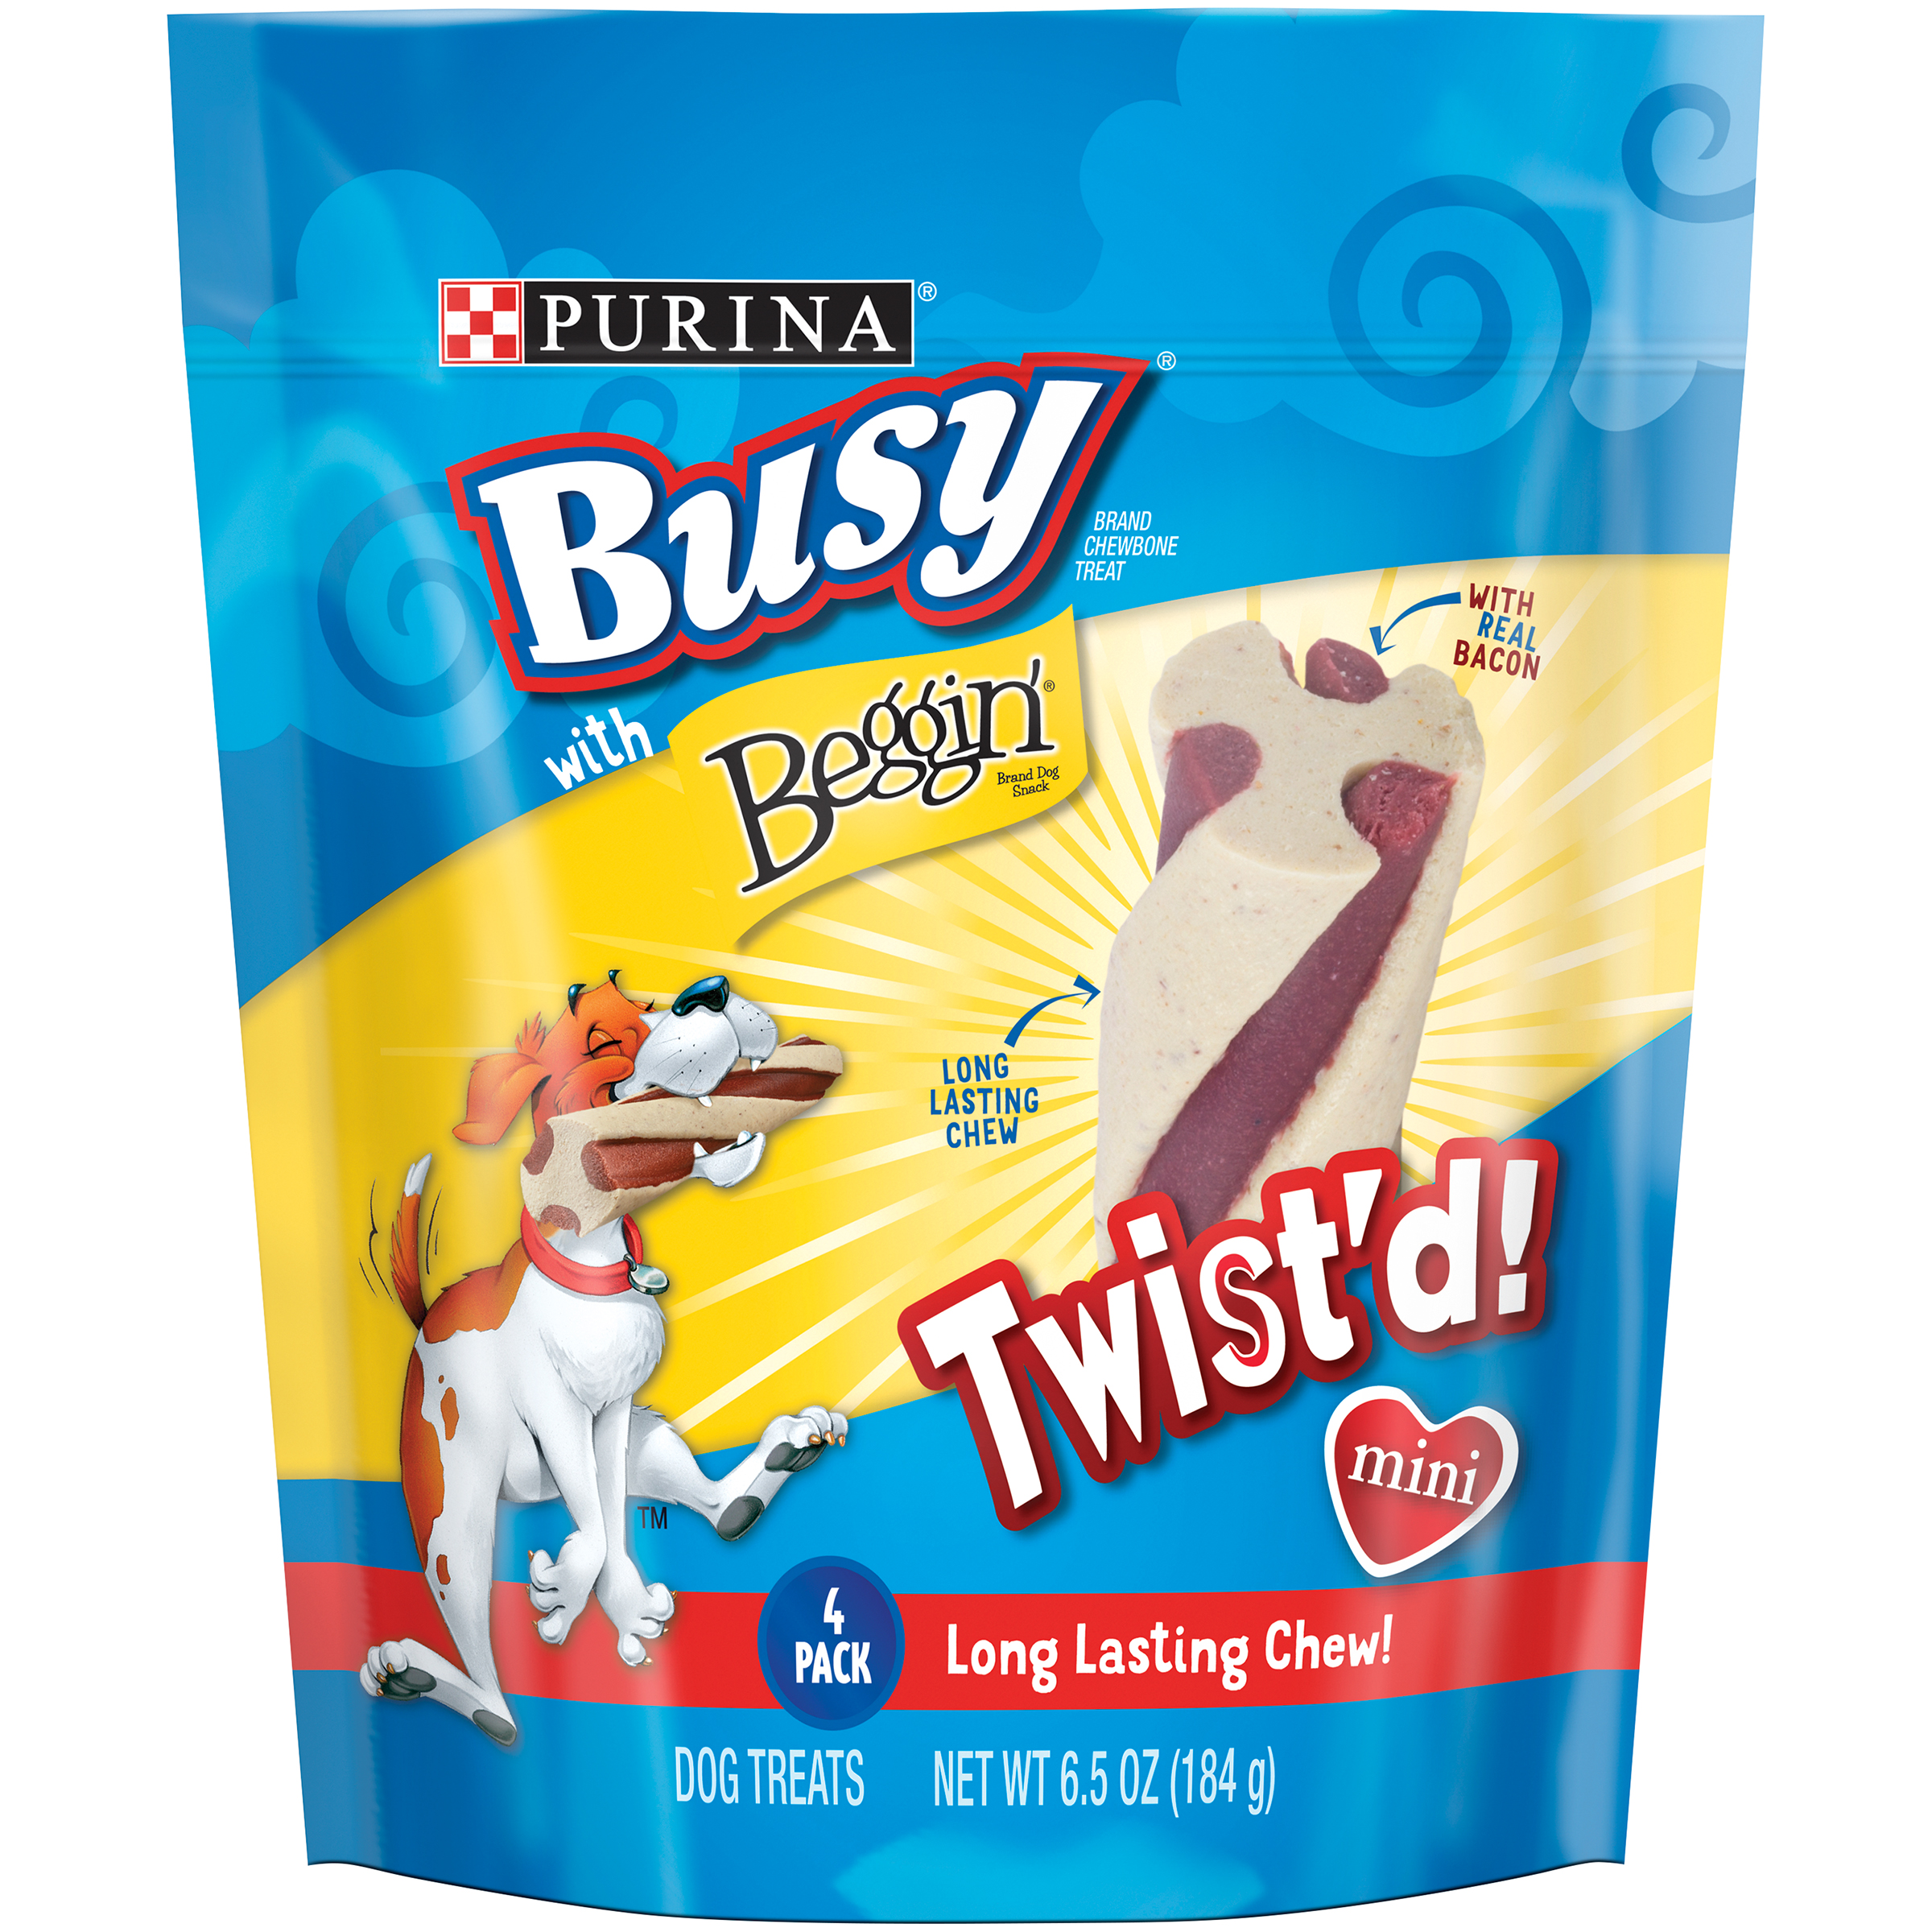 Nestle Purina Petcare Co. Purina Busy with Beggin' Twist'd Mini Dog Treats, 4 ct Pouch